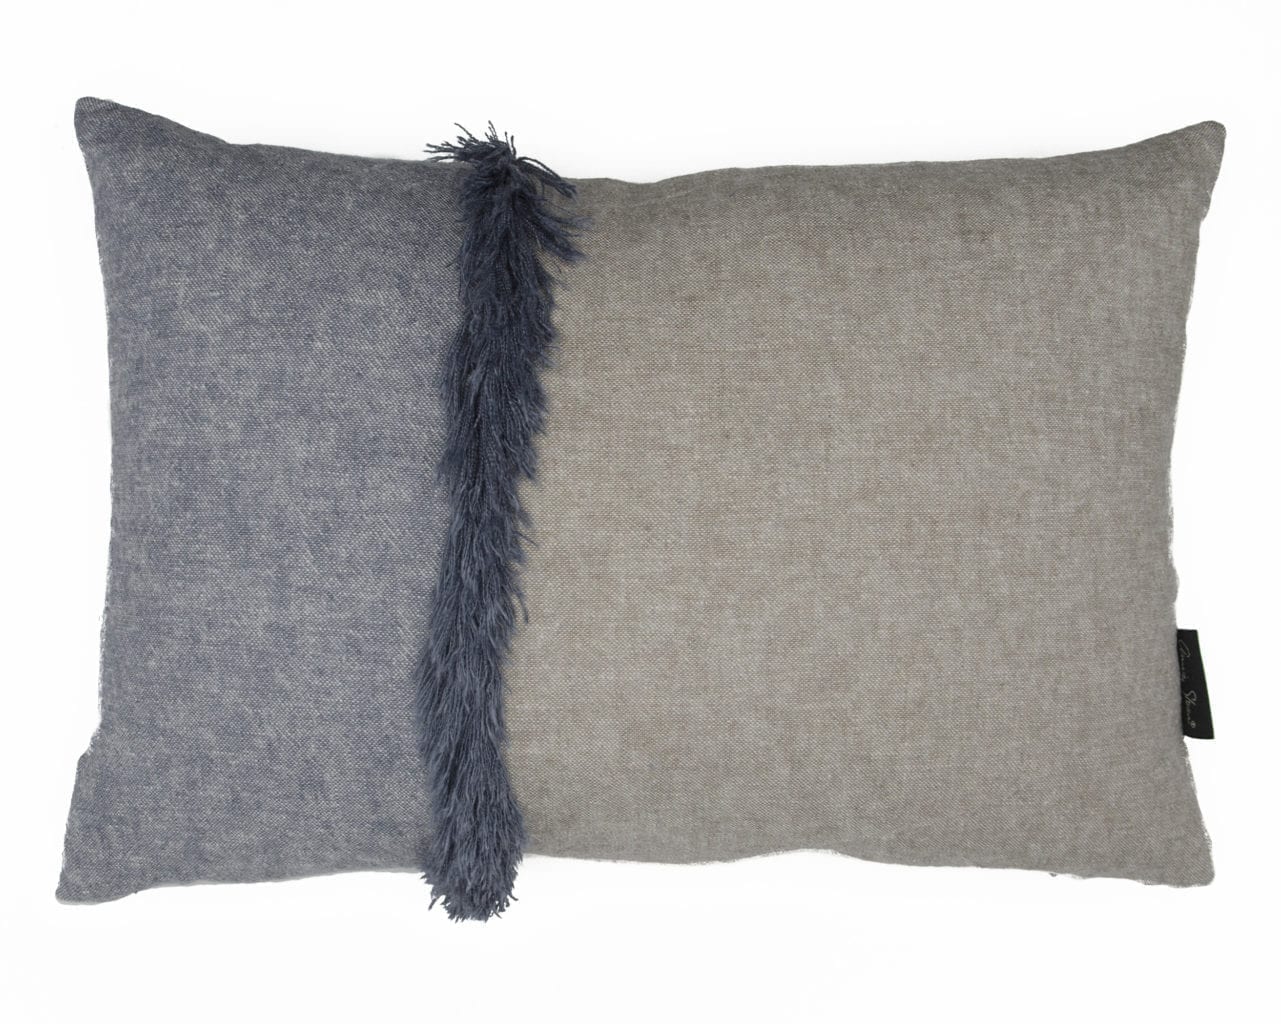 Bilbao Rectangle Cushion in Linen Union in Old Violet + Old White and Old White + French Linen